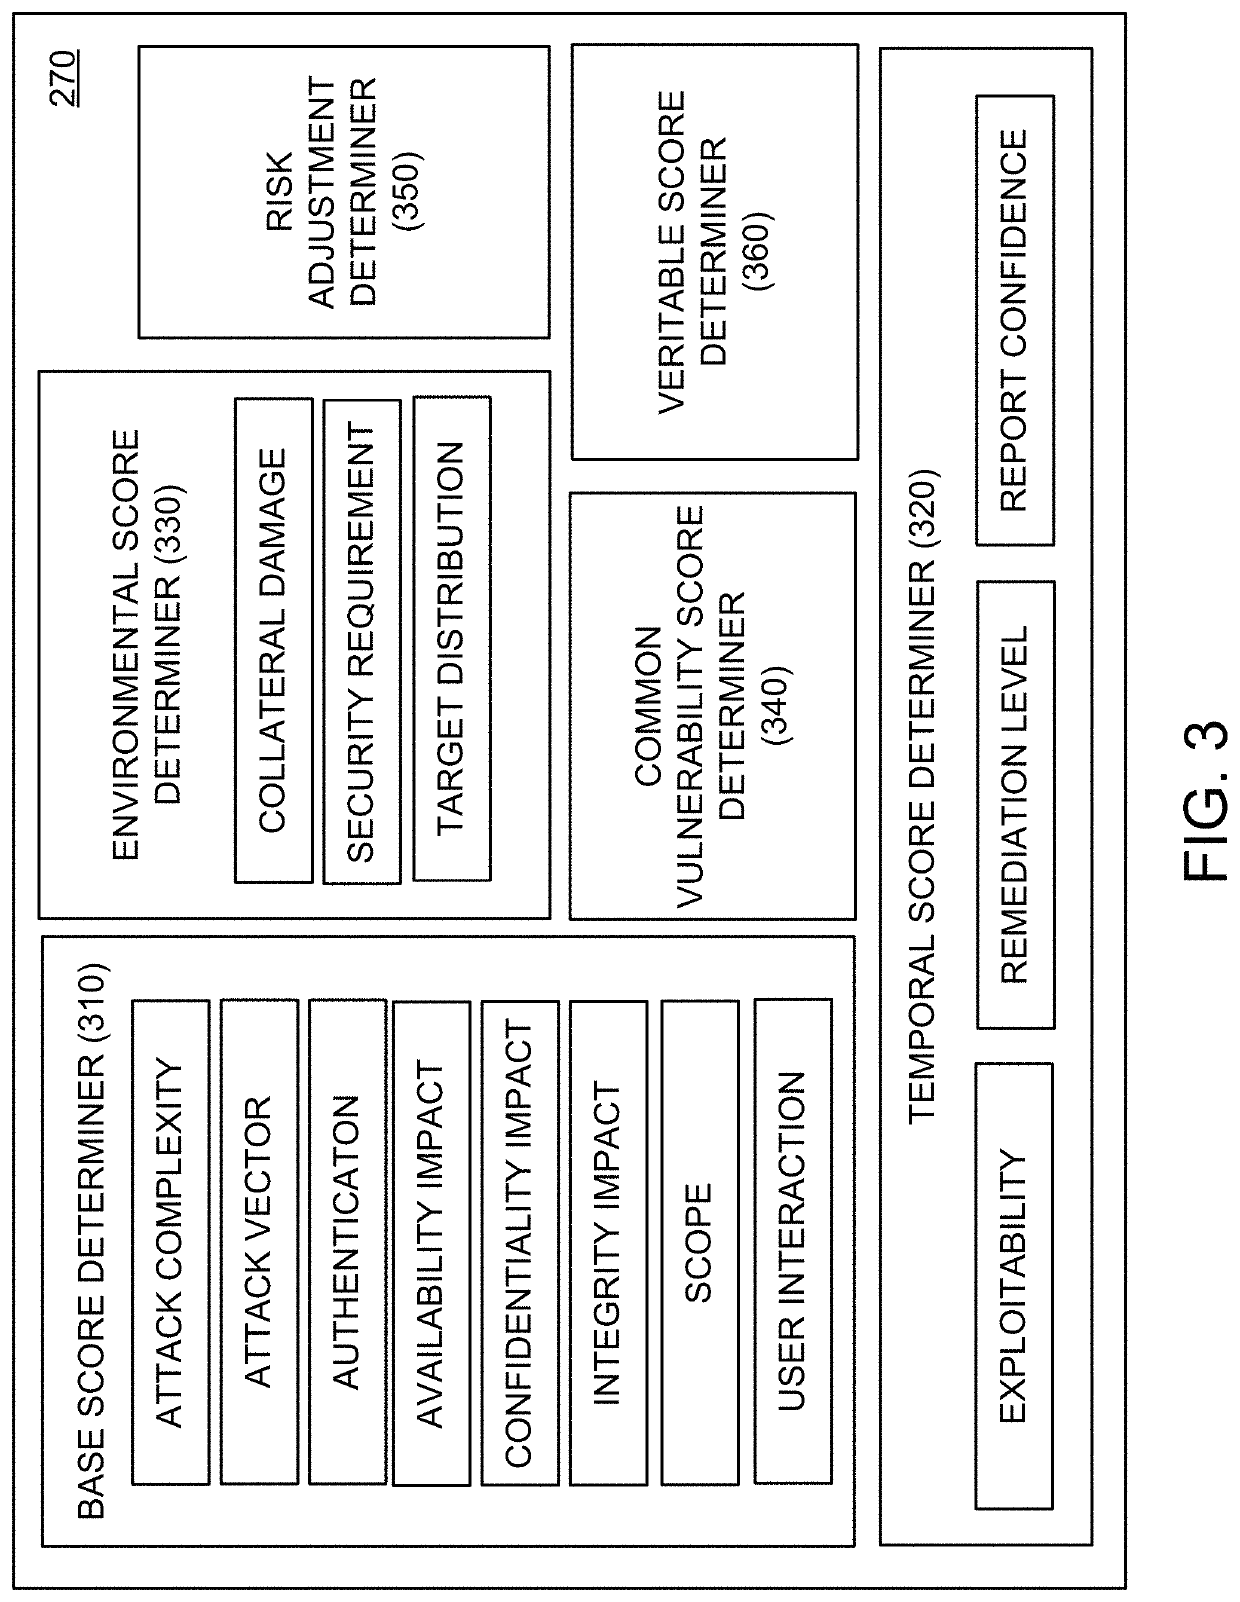 Cybersecurity vulnerability classification and remediation based on network utilization